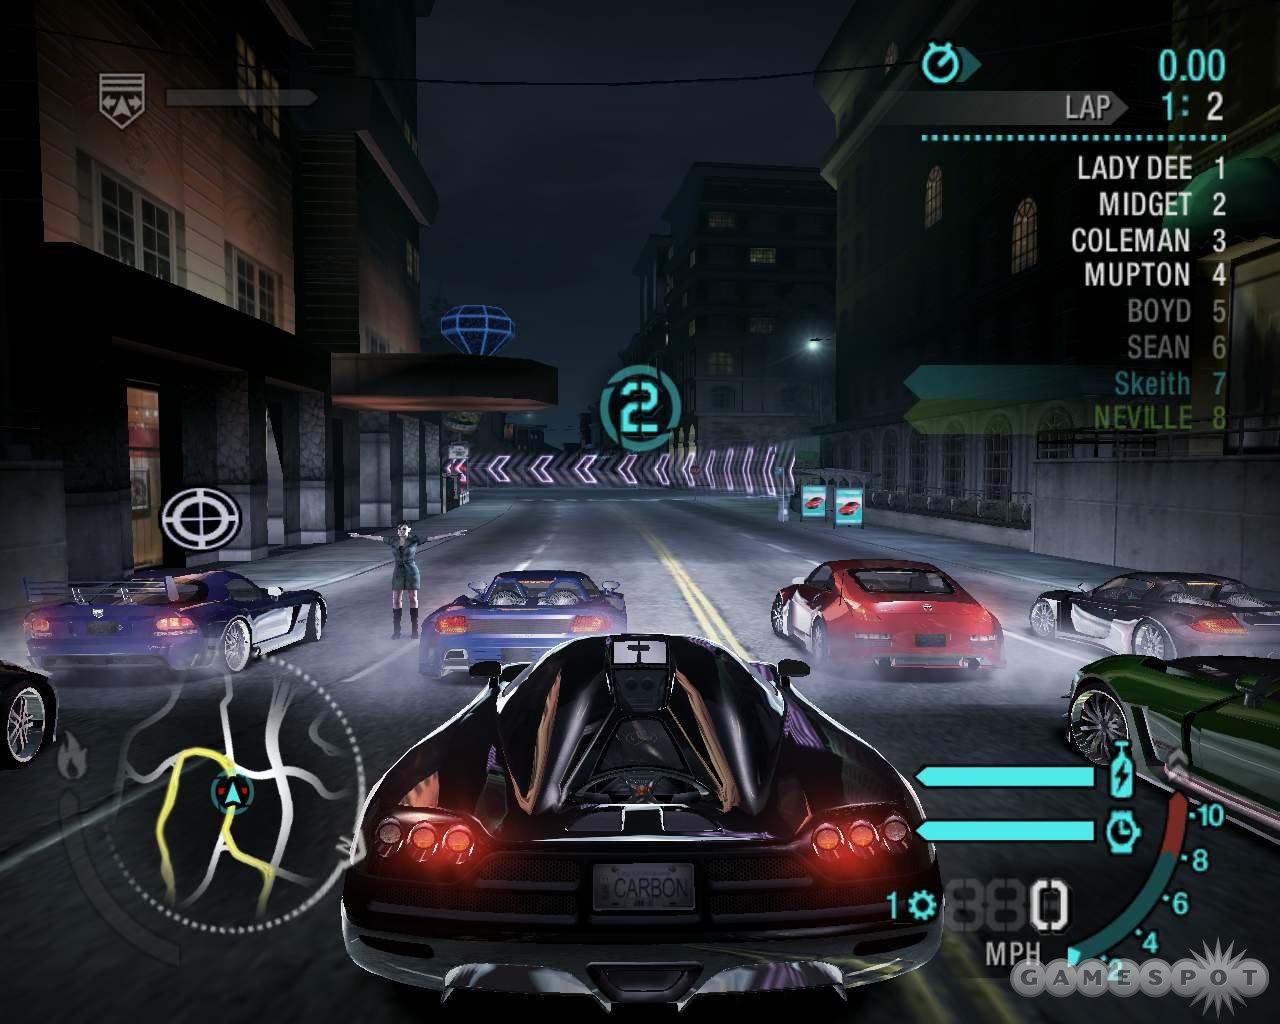 Download Need for Speed Carbon MULTi12 rar